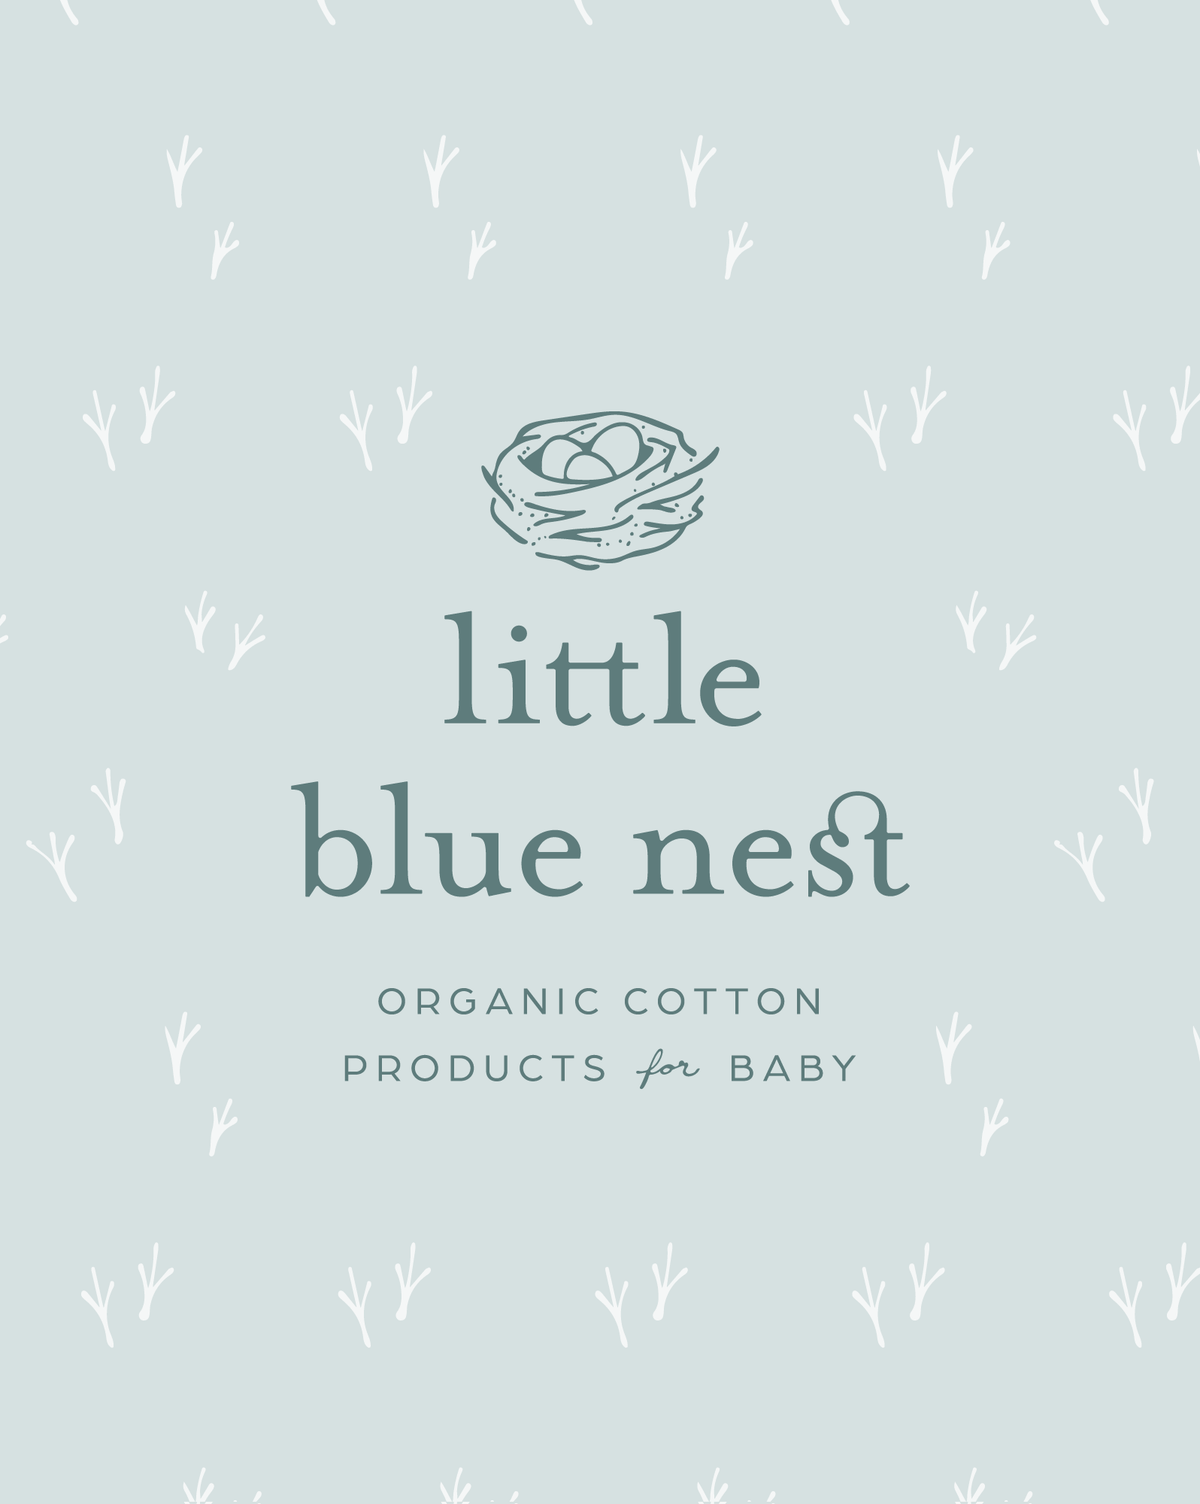 Little Blue Nest Organic Cotton products for Baby Gift Card